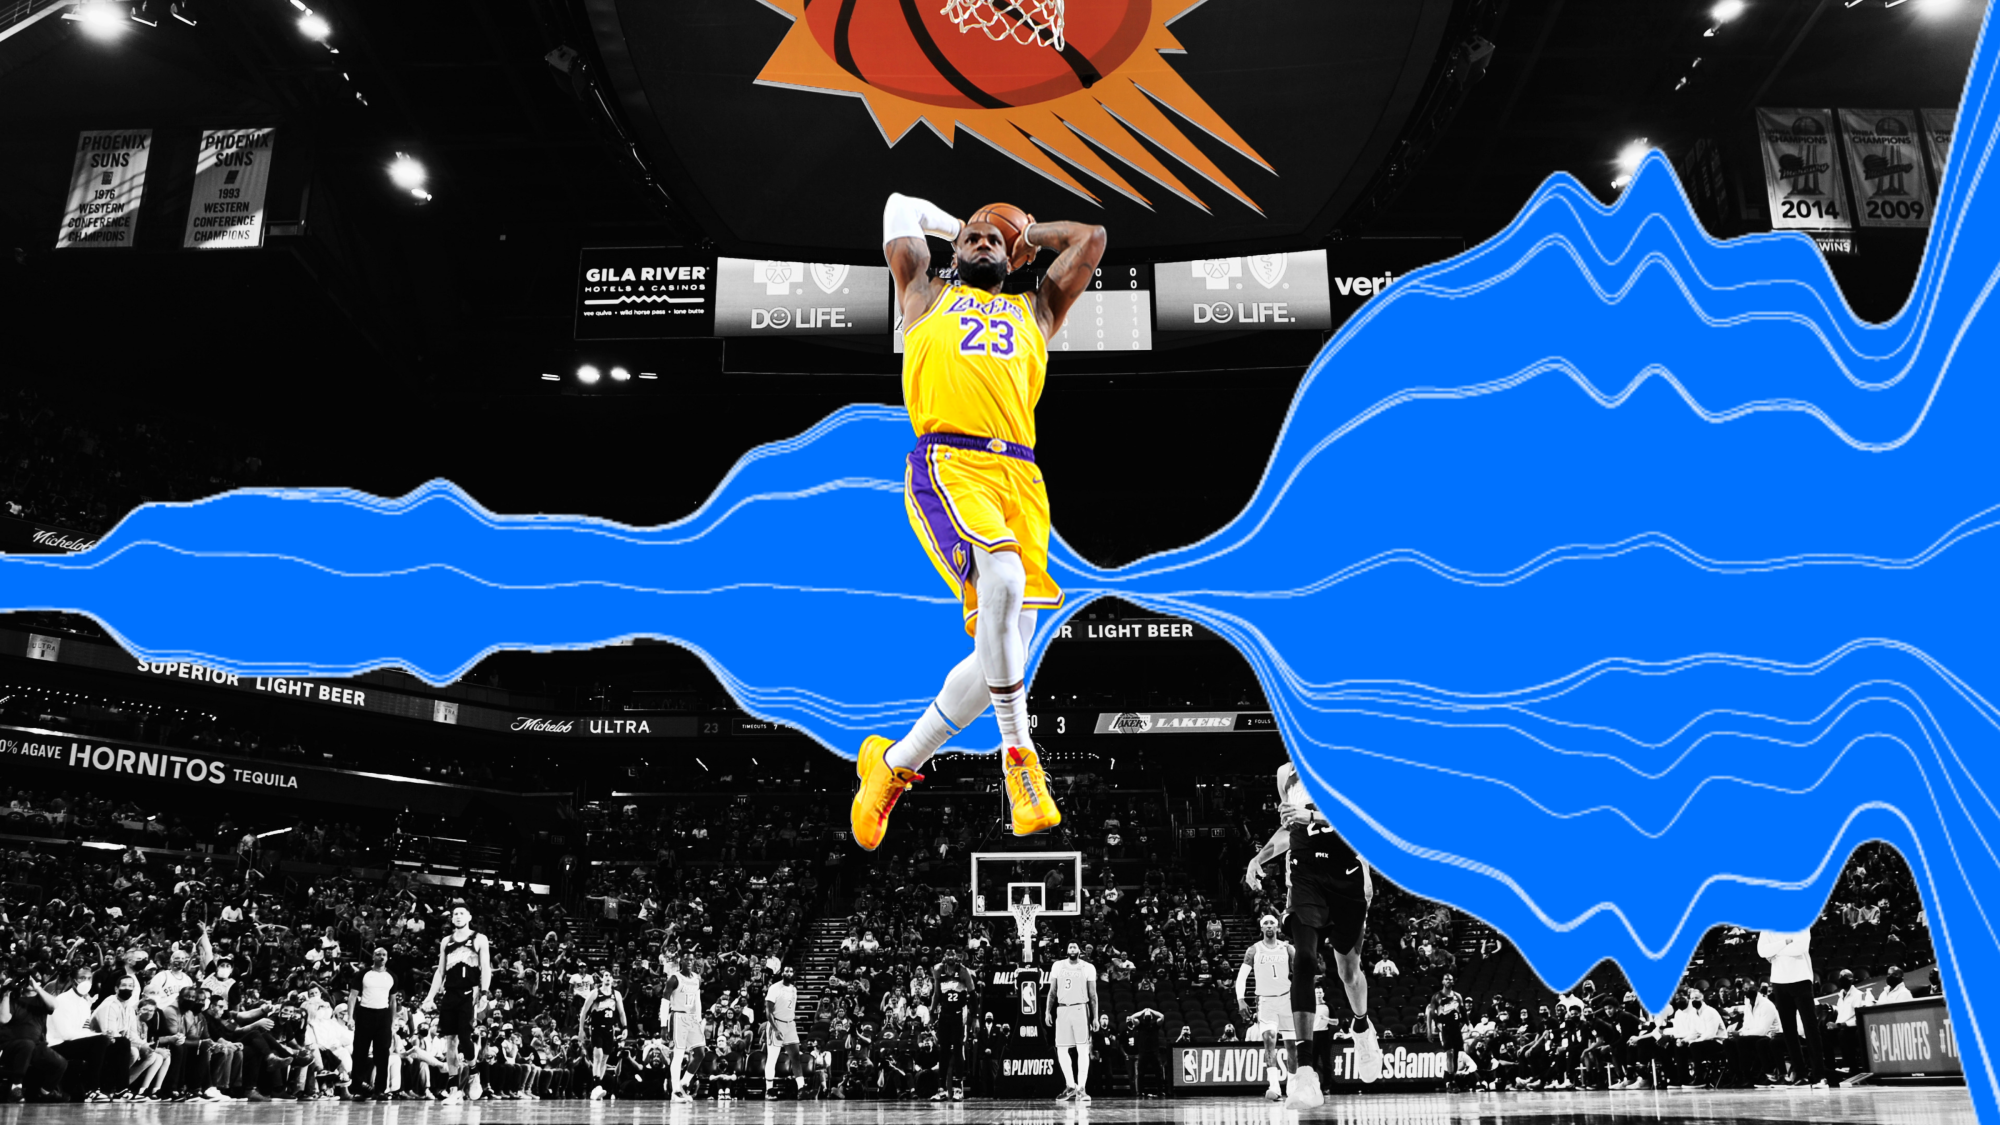 Lebron James dunks a basketball with streamgraph of bets placed on sports over time